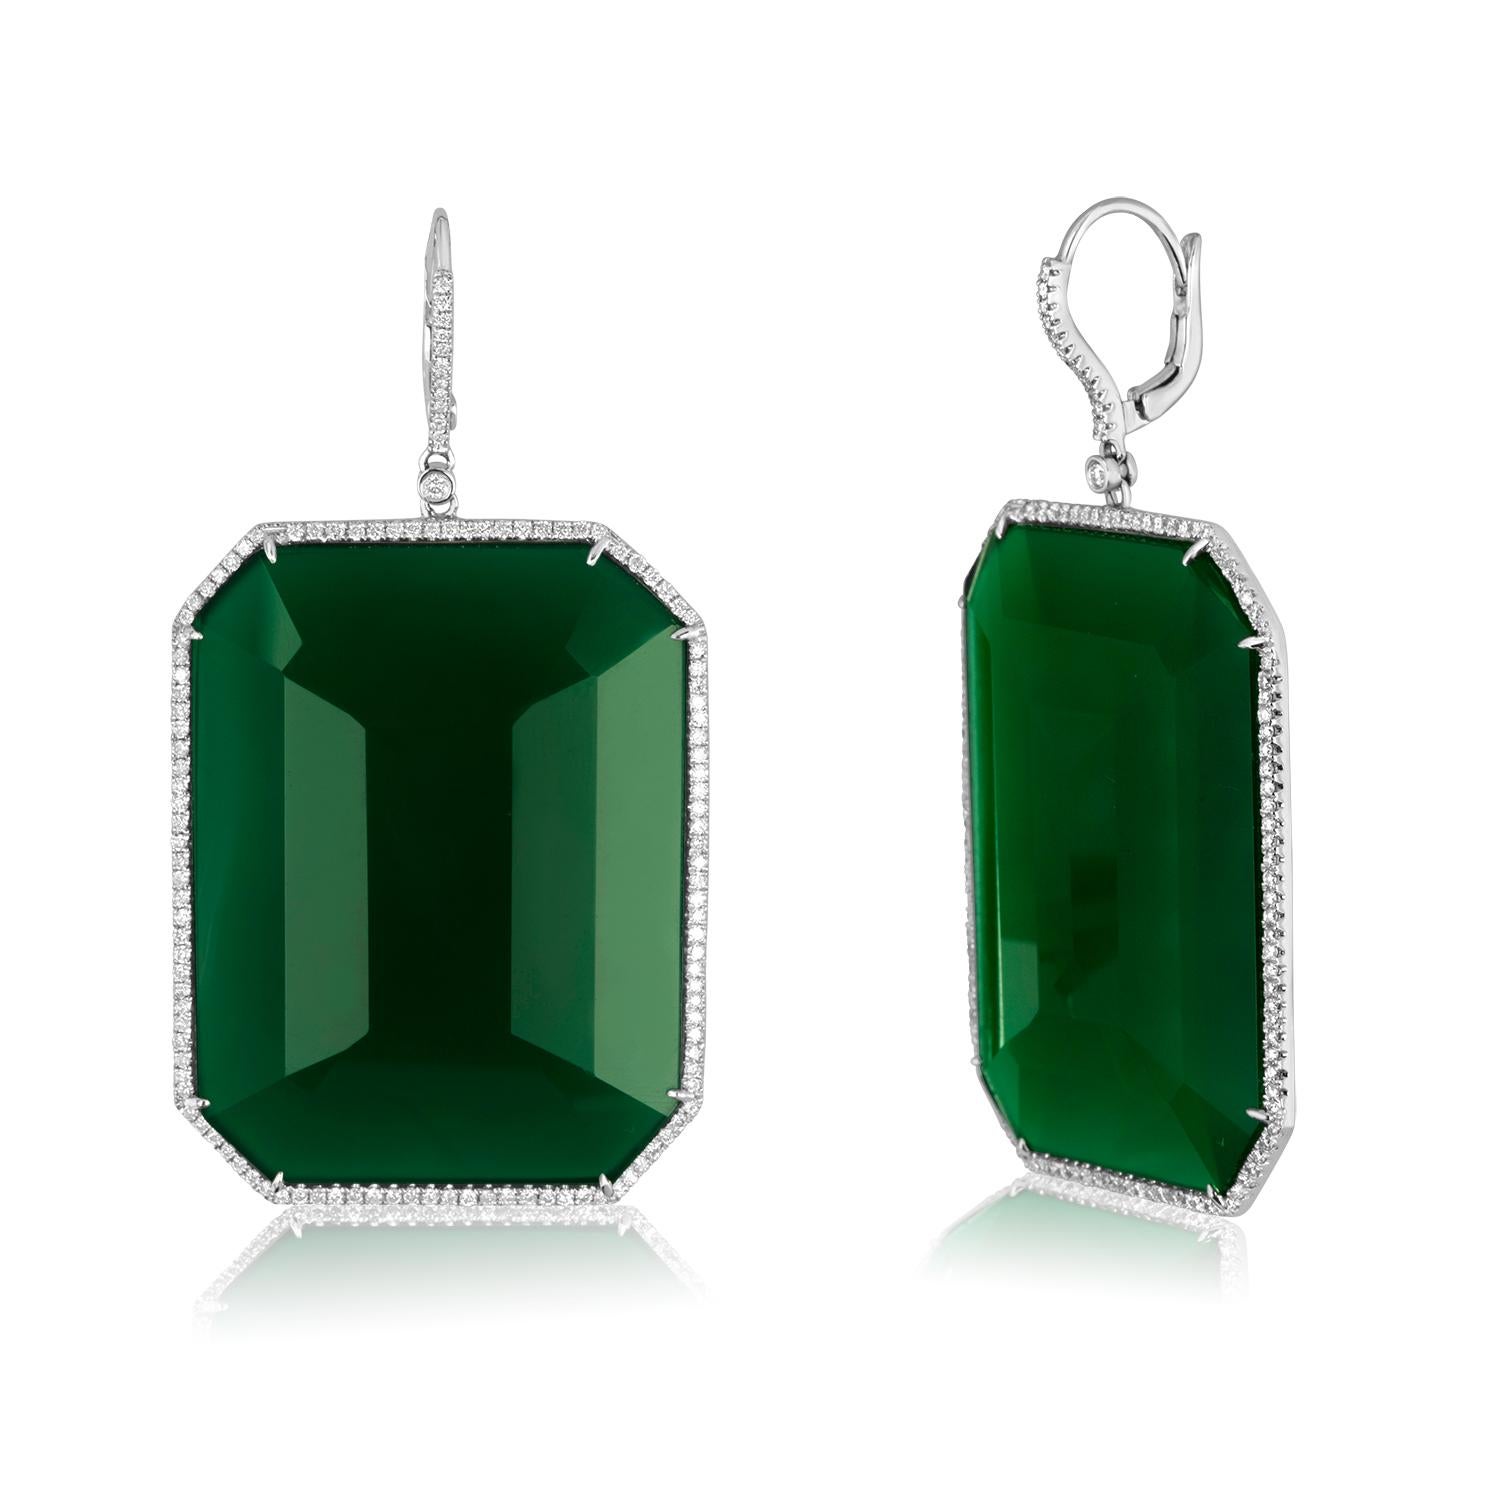 Show Stopping Green Agate Earrrings surrounded in Diamonds Set in 18K White Gold.
There are 1.40ct in H SI Diamonds.
There are 118.15ct in Green Agate.
The earrings measure 2.5